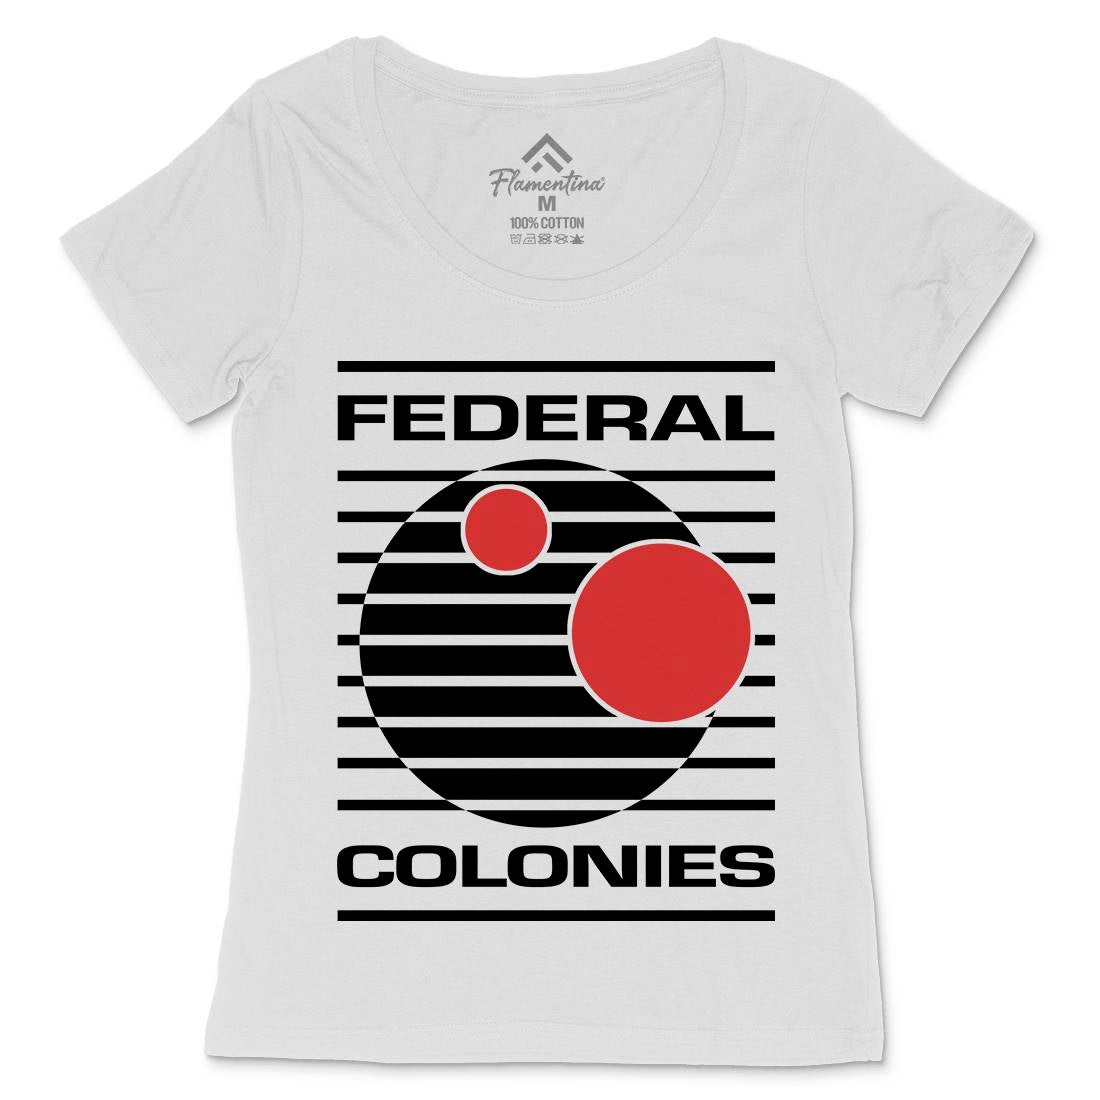 Federal Colonies Womens Scoop Neck T-Shirt Space D409